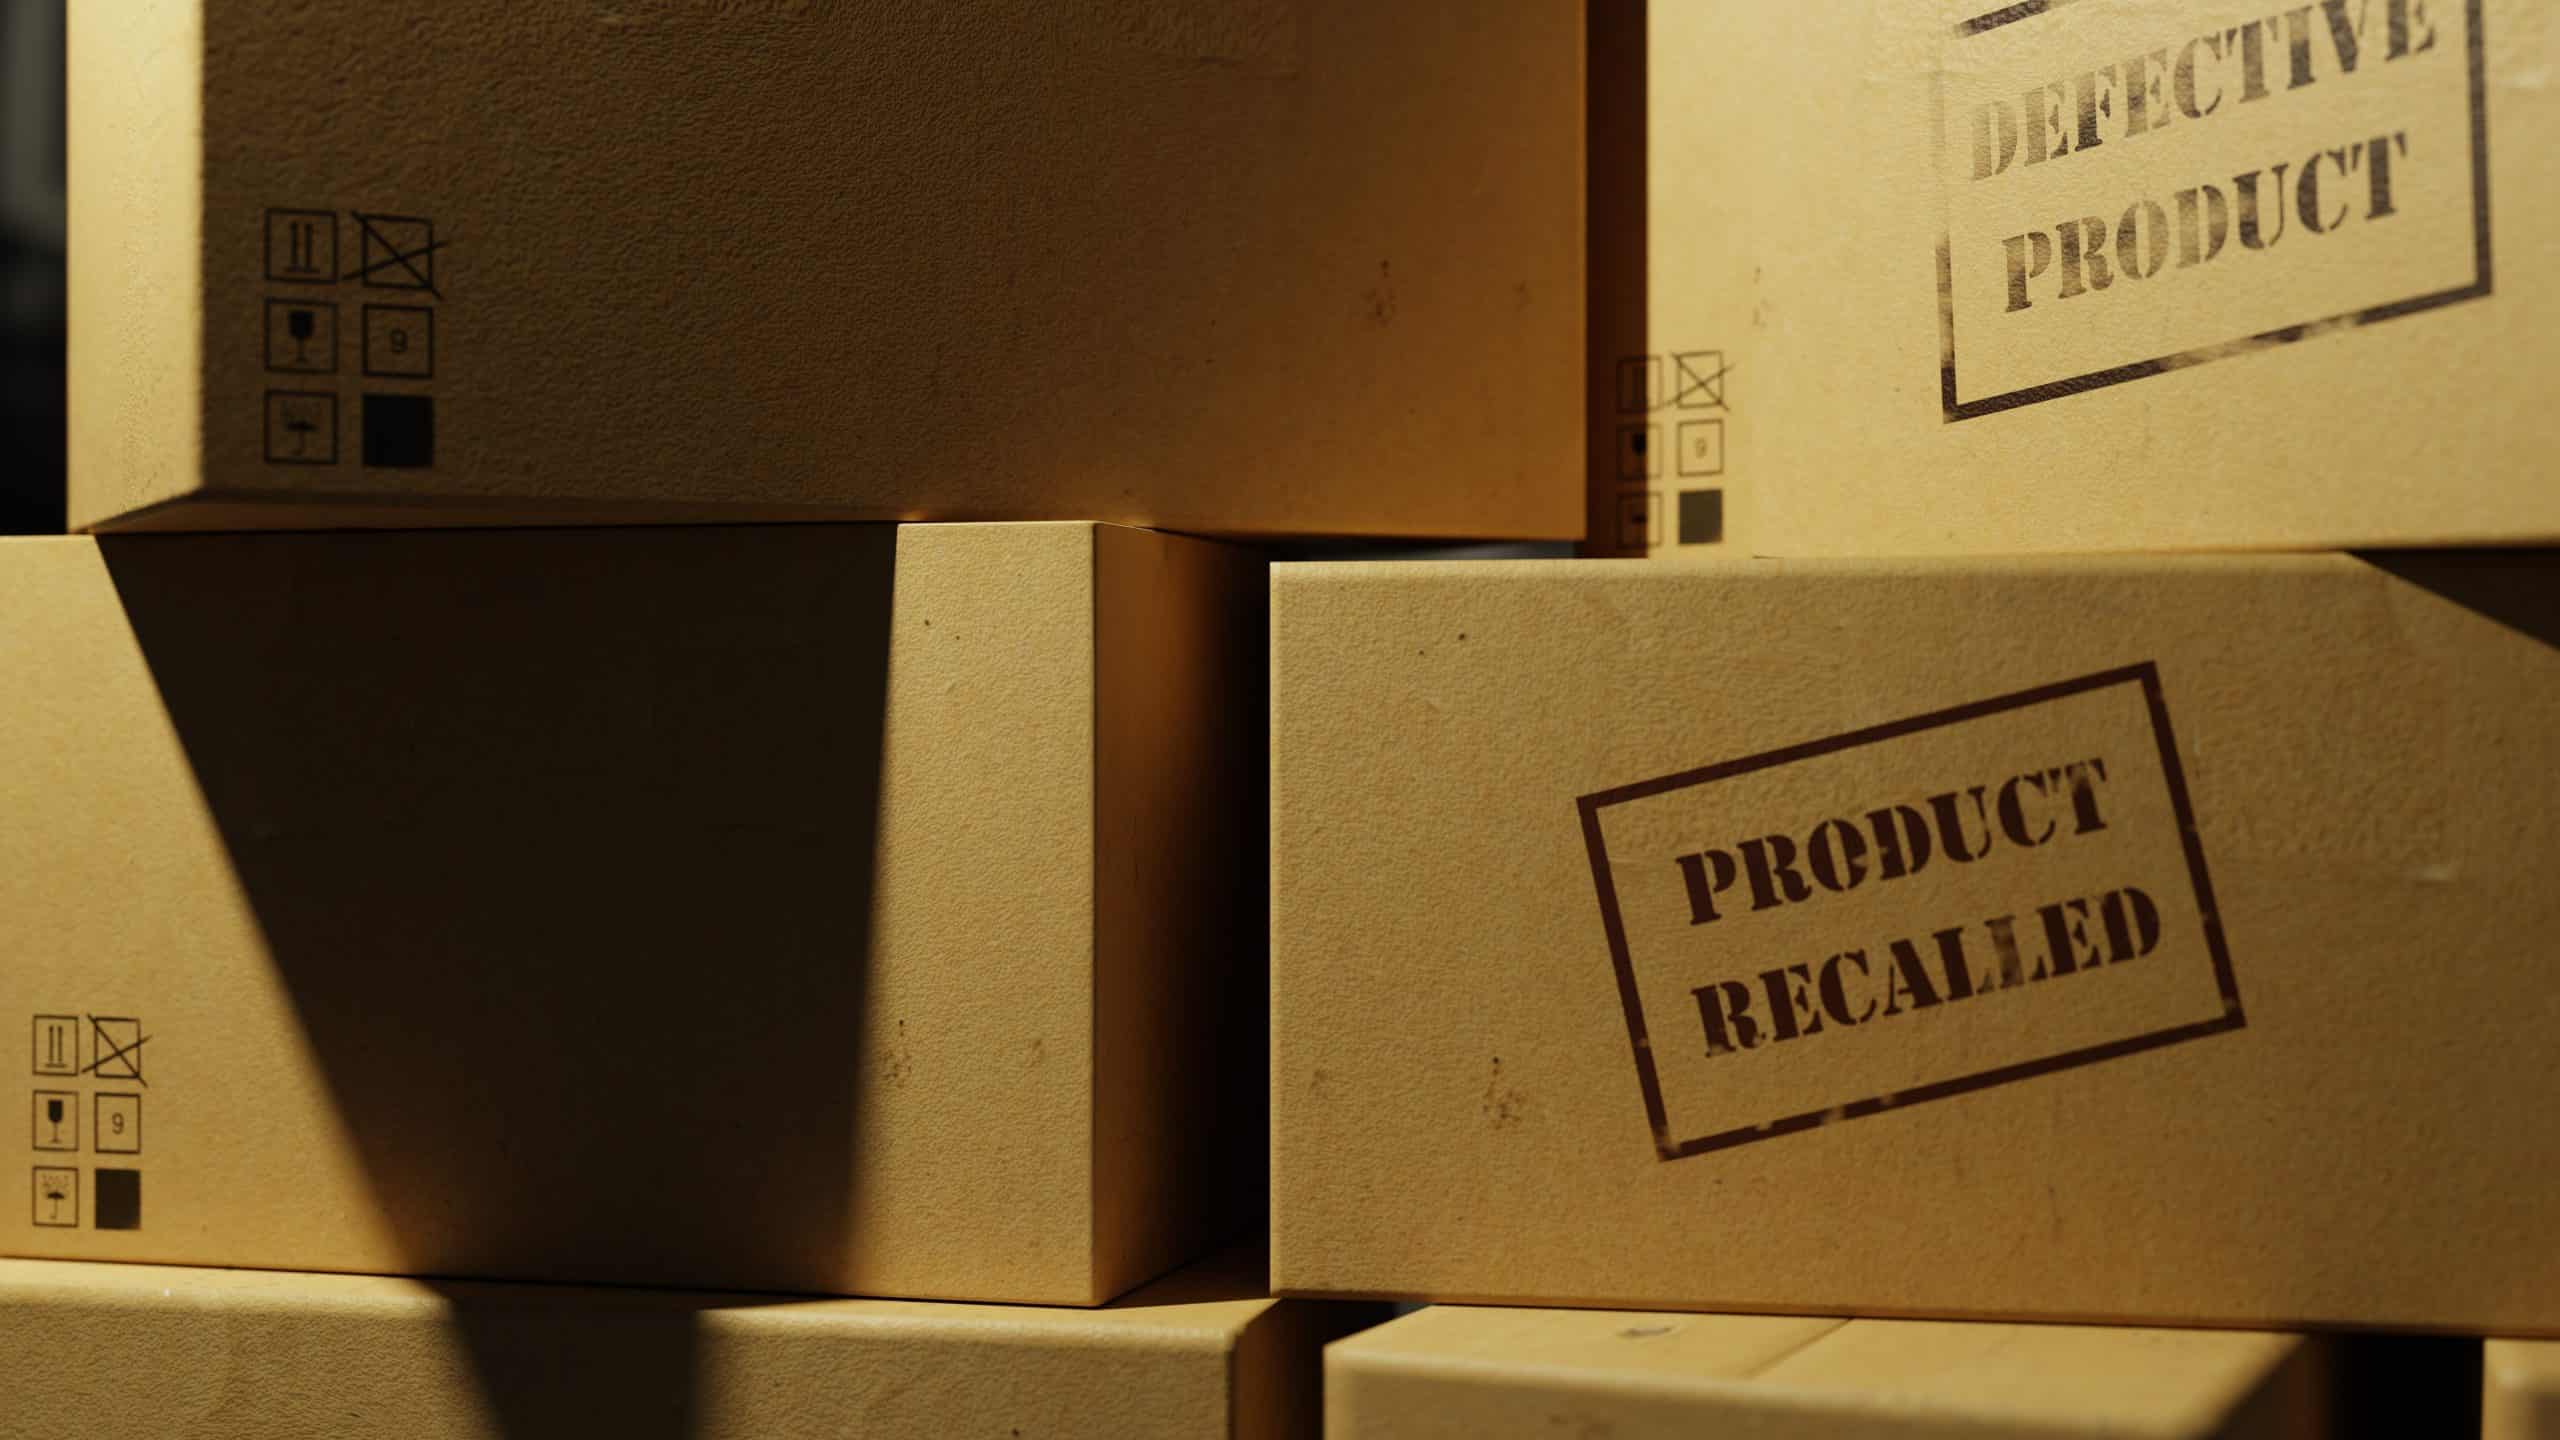 Boxes labeled “defective product” and “product recalled” are stacked on top of each other to be sent back to the manufacturer.